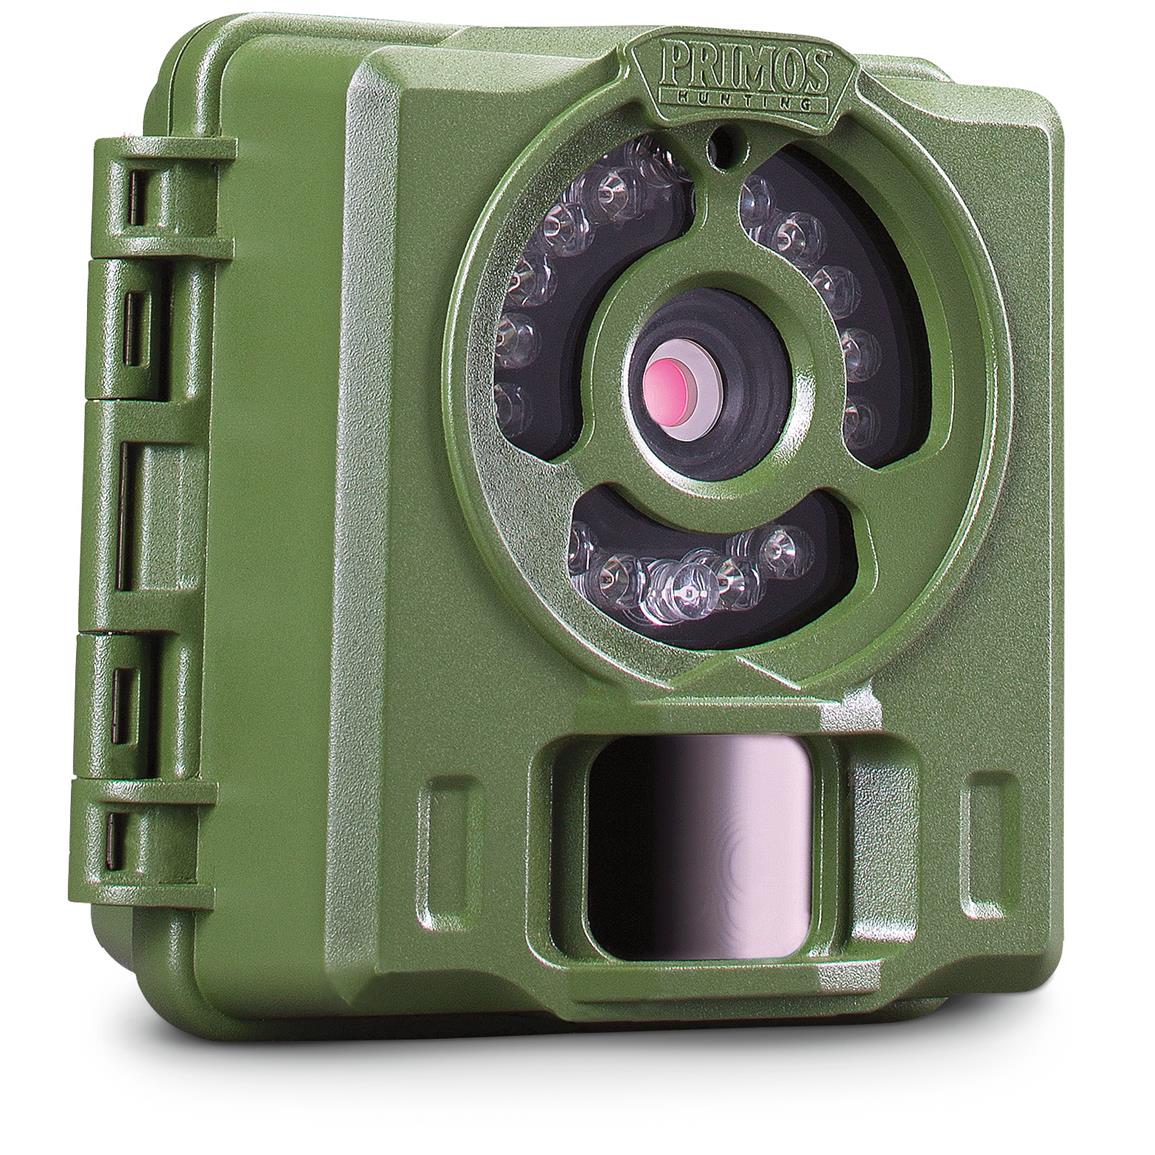 primos-bullet-proof-2-trail-game-camera-8mp-668008-game-trail